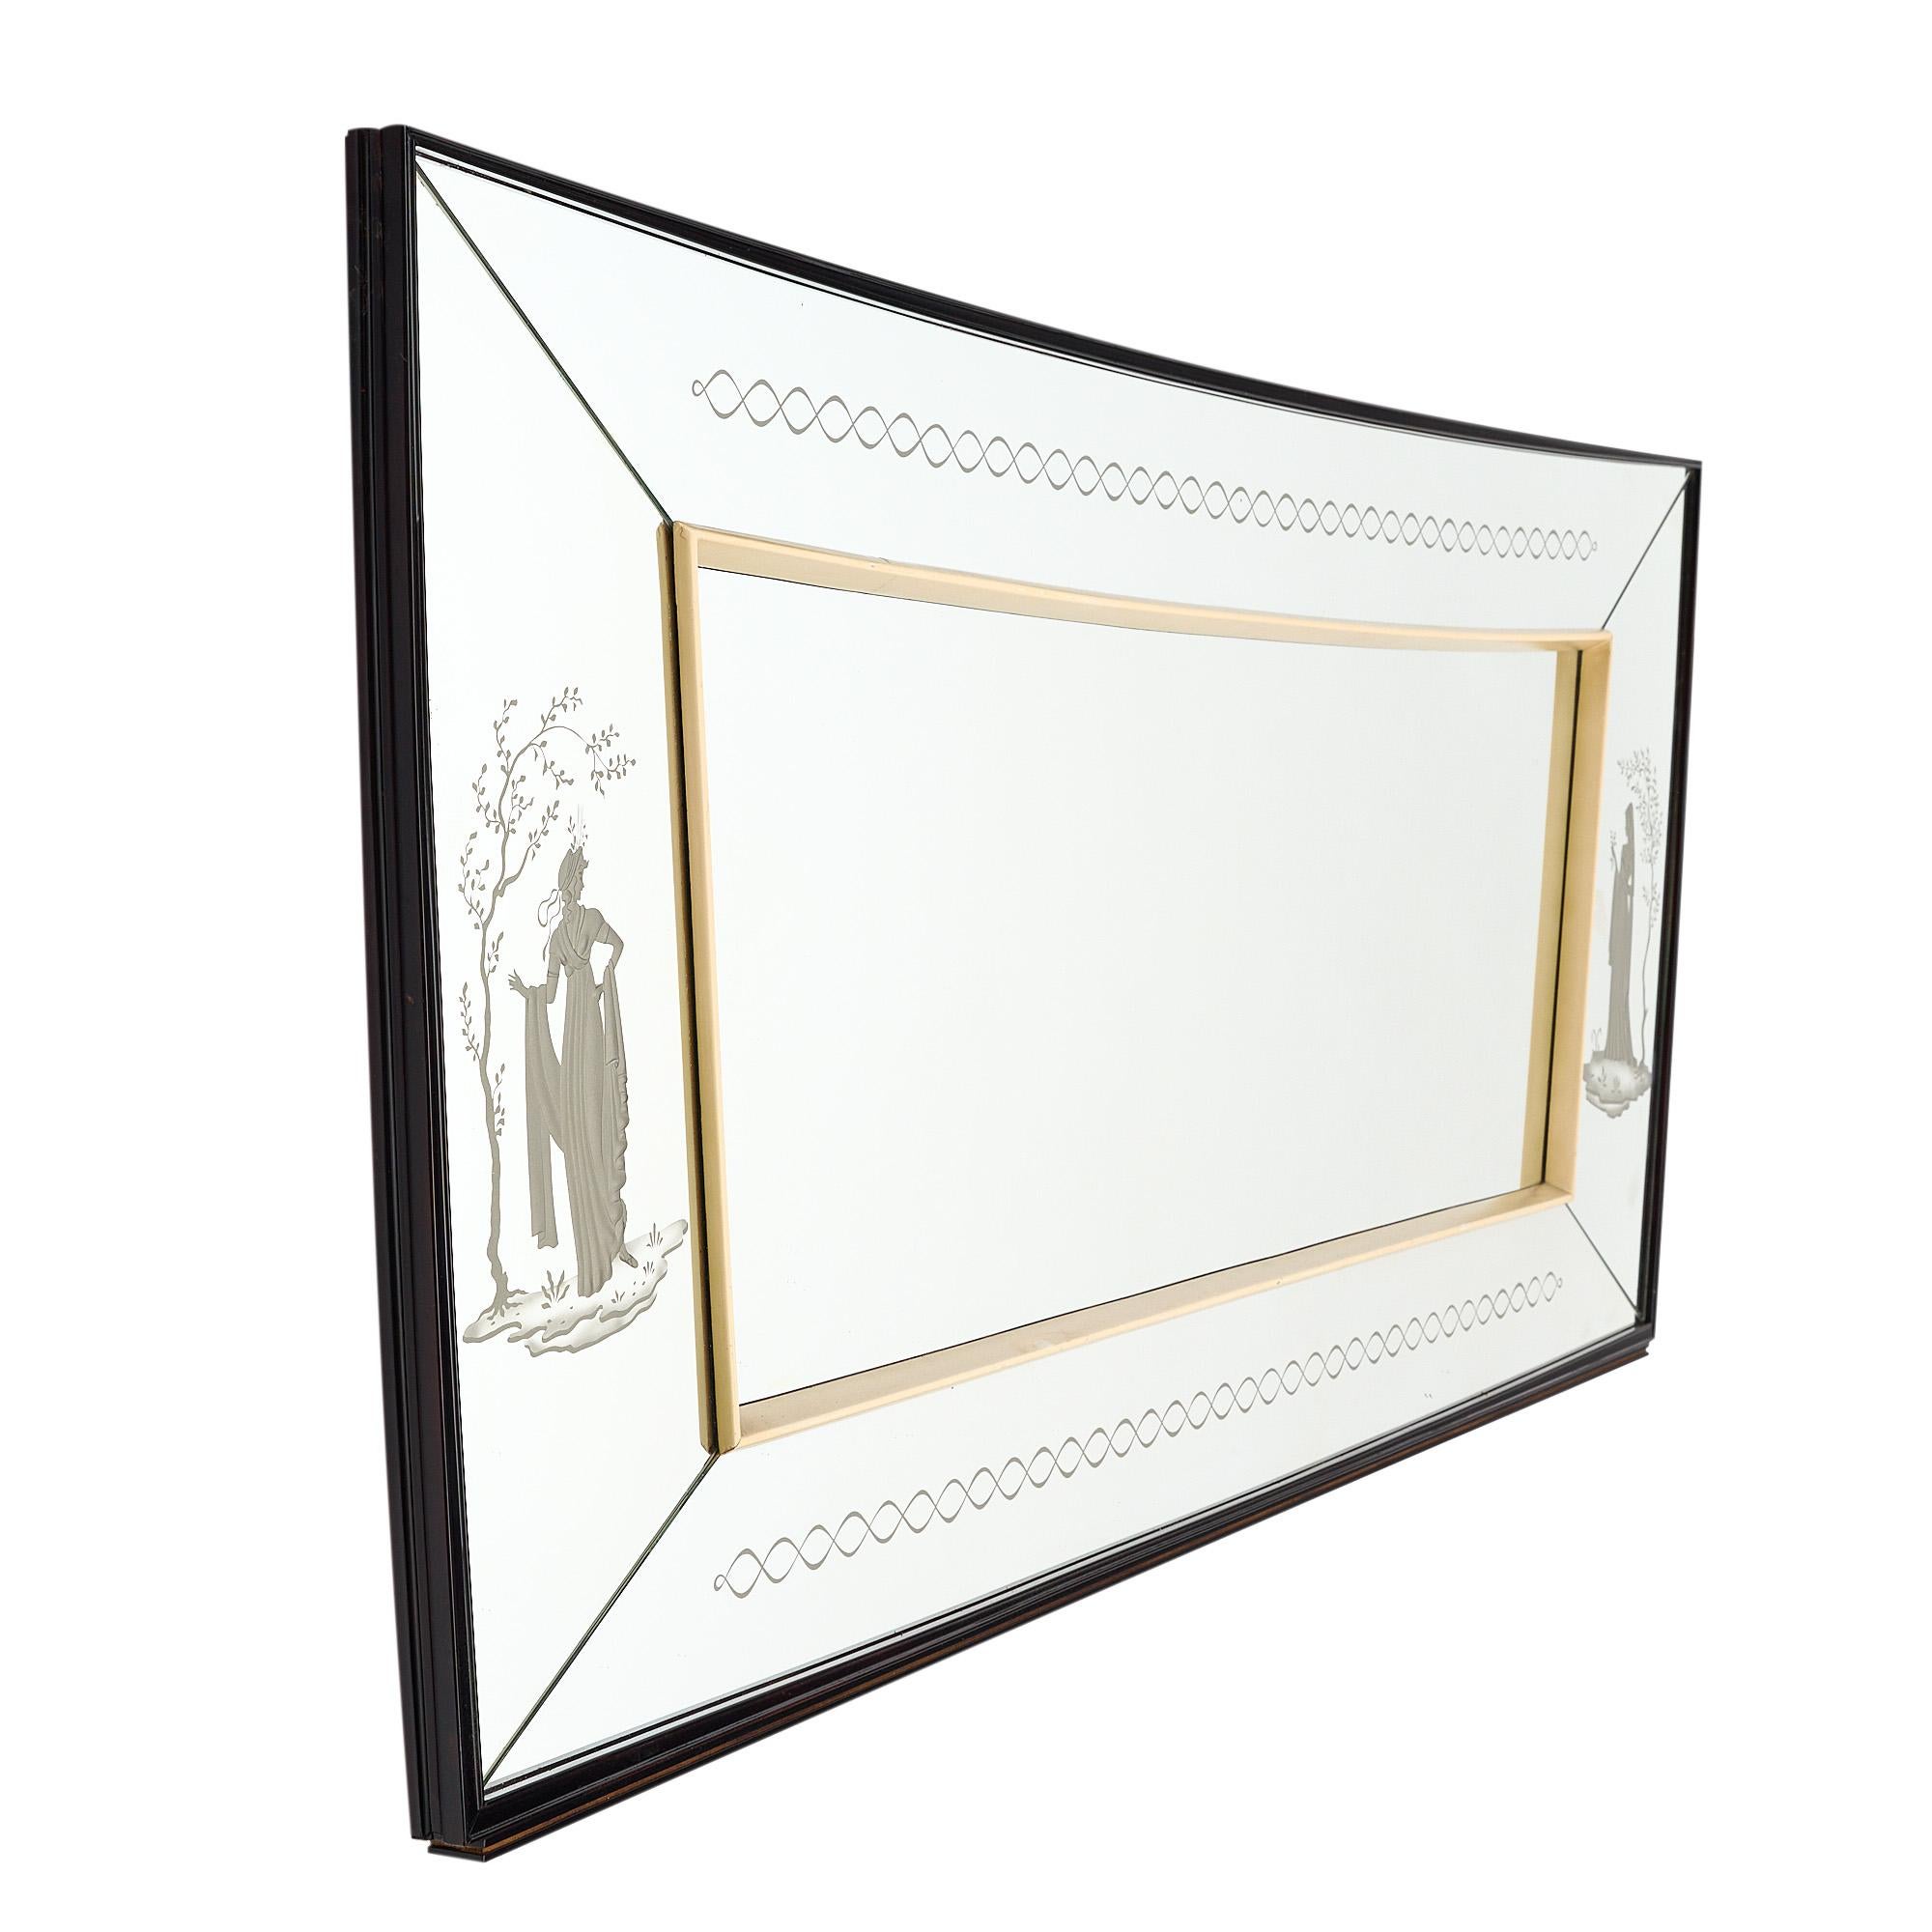 Grand mirror, French. This piece features an inside maple wood frame and engraved friezes featuring female figures. The length listed is at the widest point, at the narrowest point the length is 93.75”.